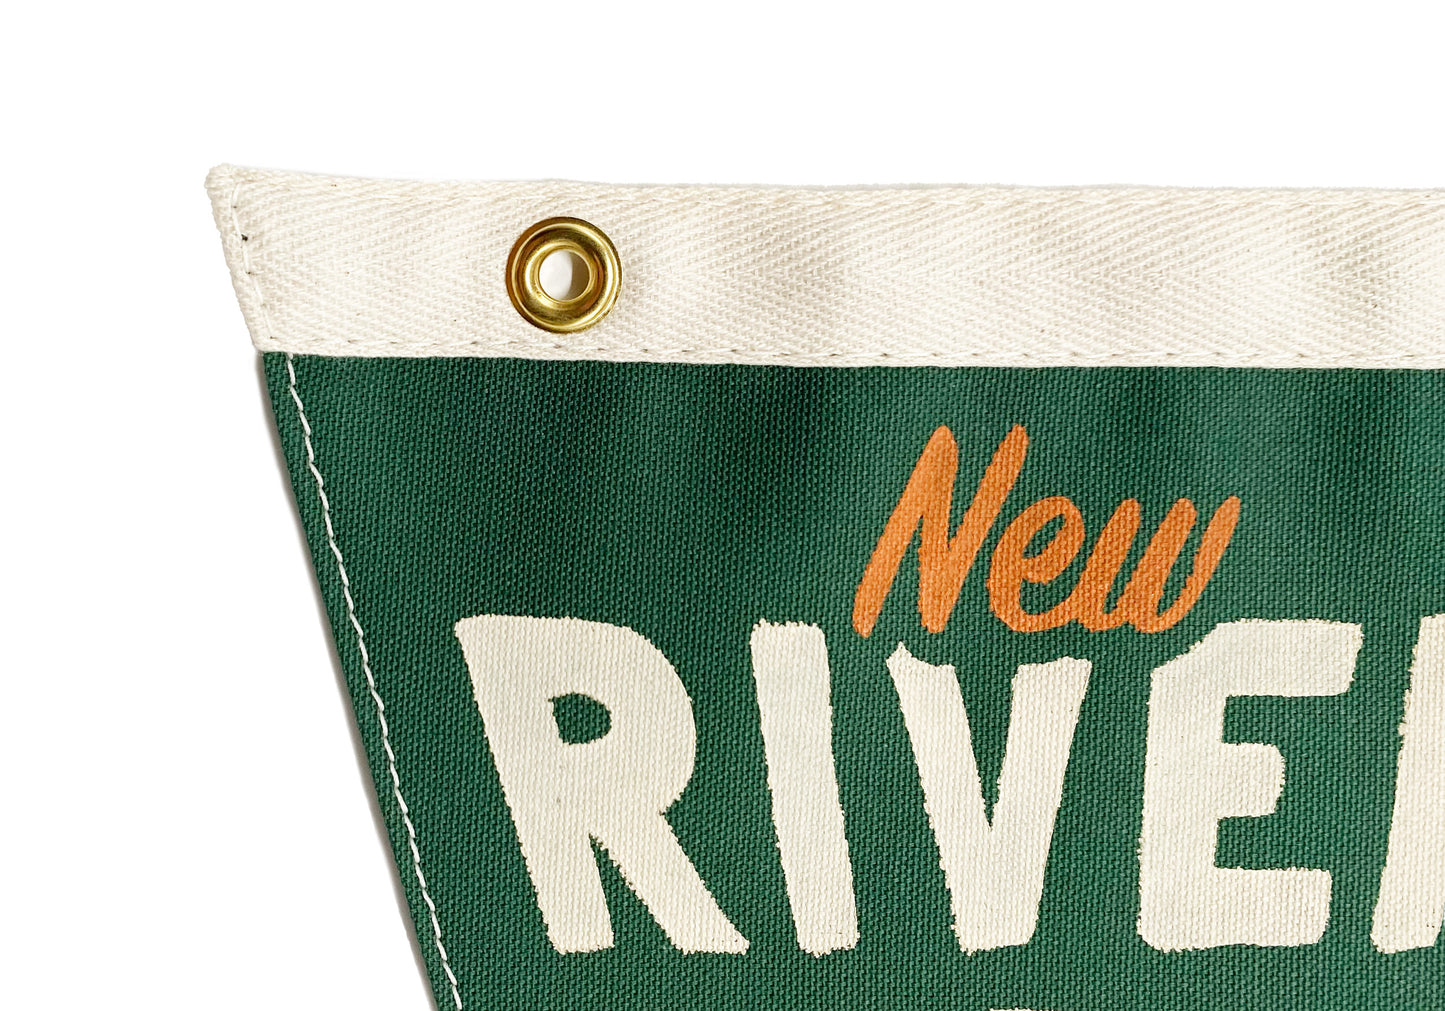 New River Gorge National Park Pennant